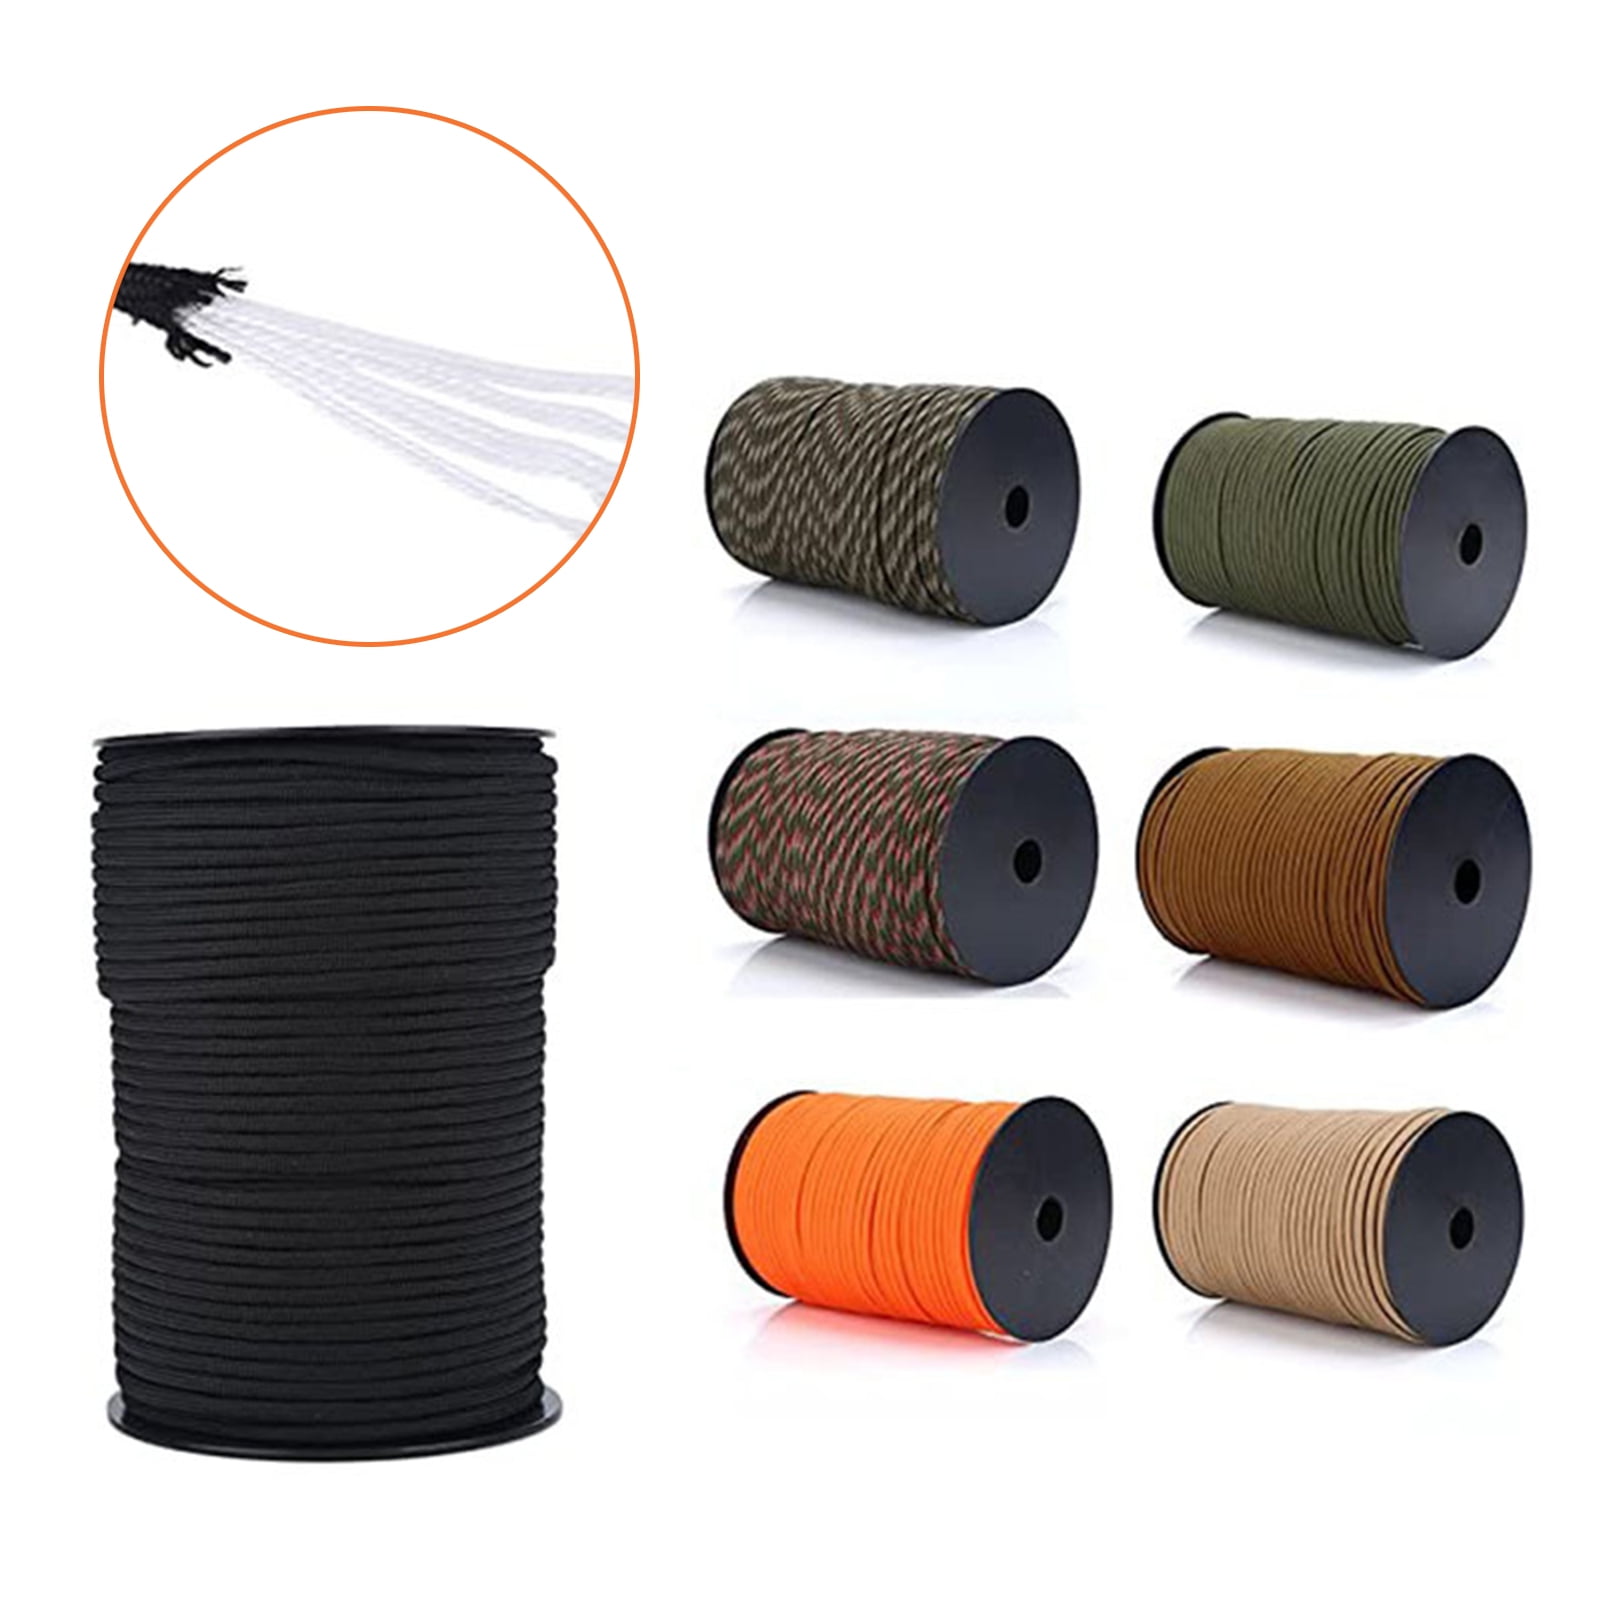 550 Reflective Military Paracord Parachute Cord Lanyard 9 Strand Core Umbrella Rope Outdoor Paratrooper Traction Rescue Bundled Tent Rope 100m